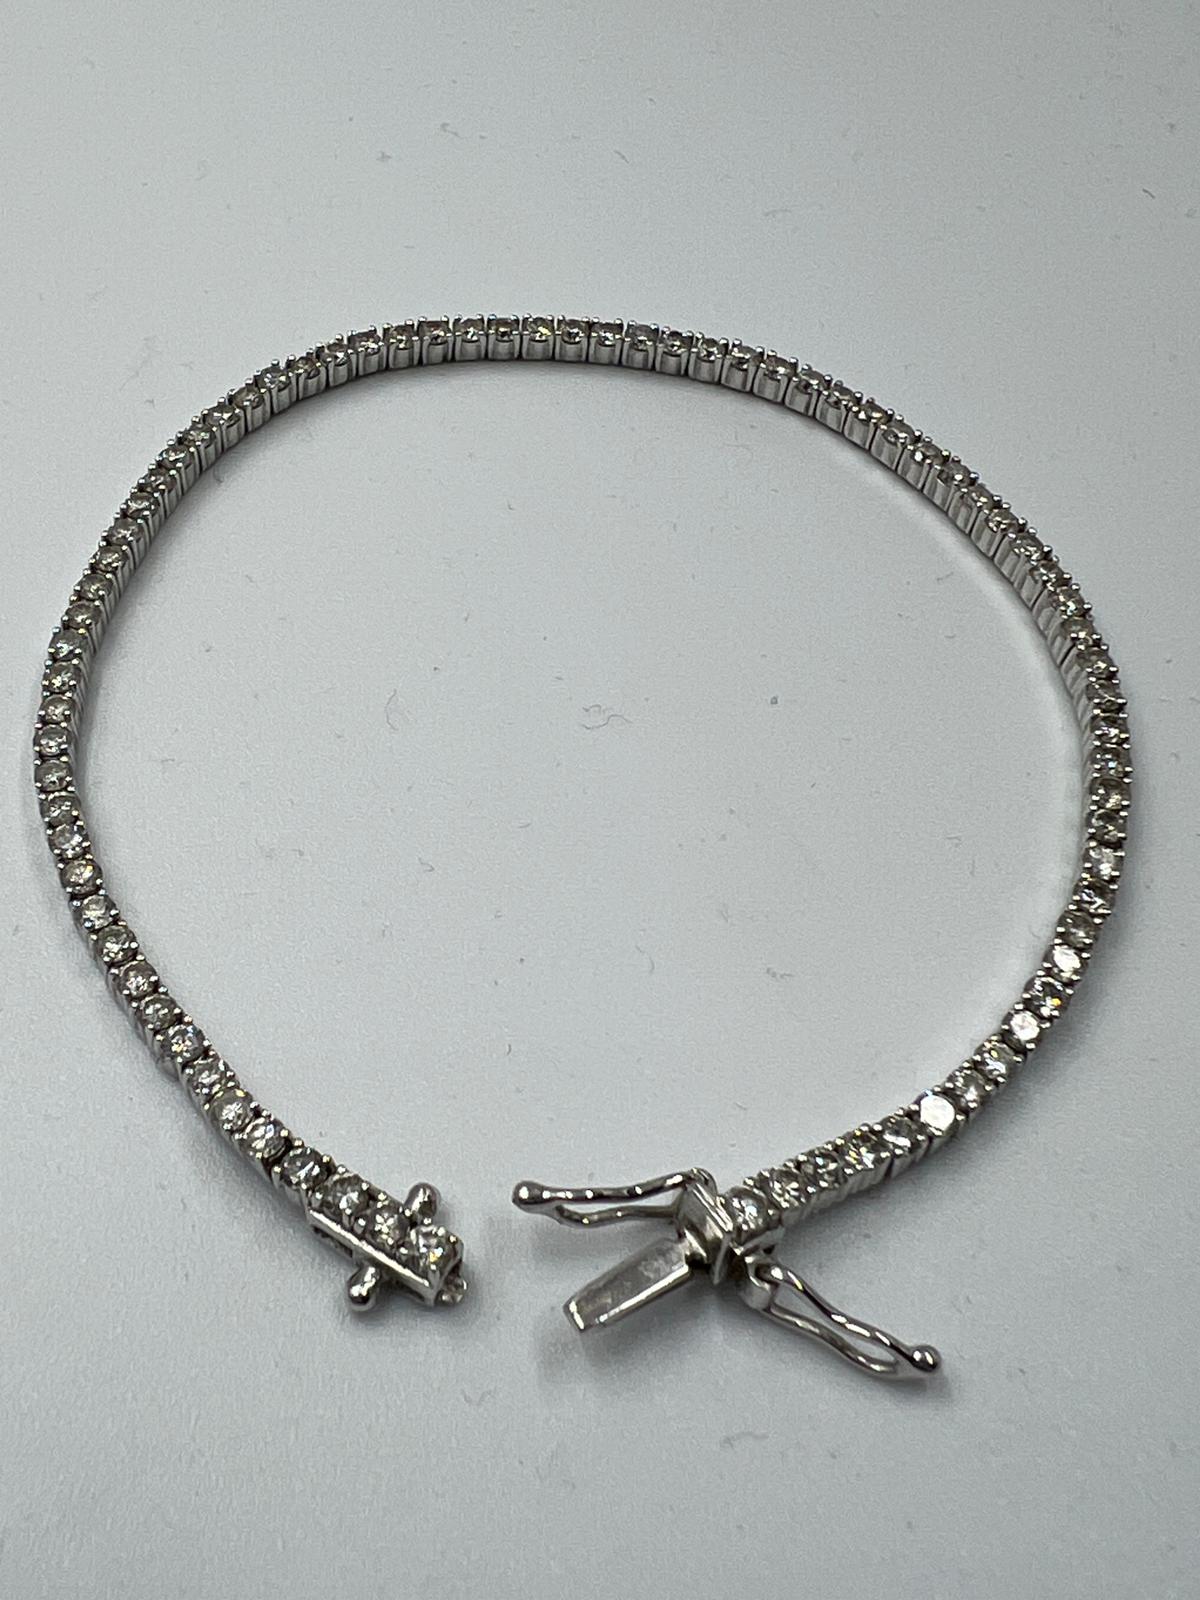 An 18ct white gold Tennis or line bracelet set with approximately 3ct of diamonds. - Image 15 of 25